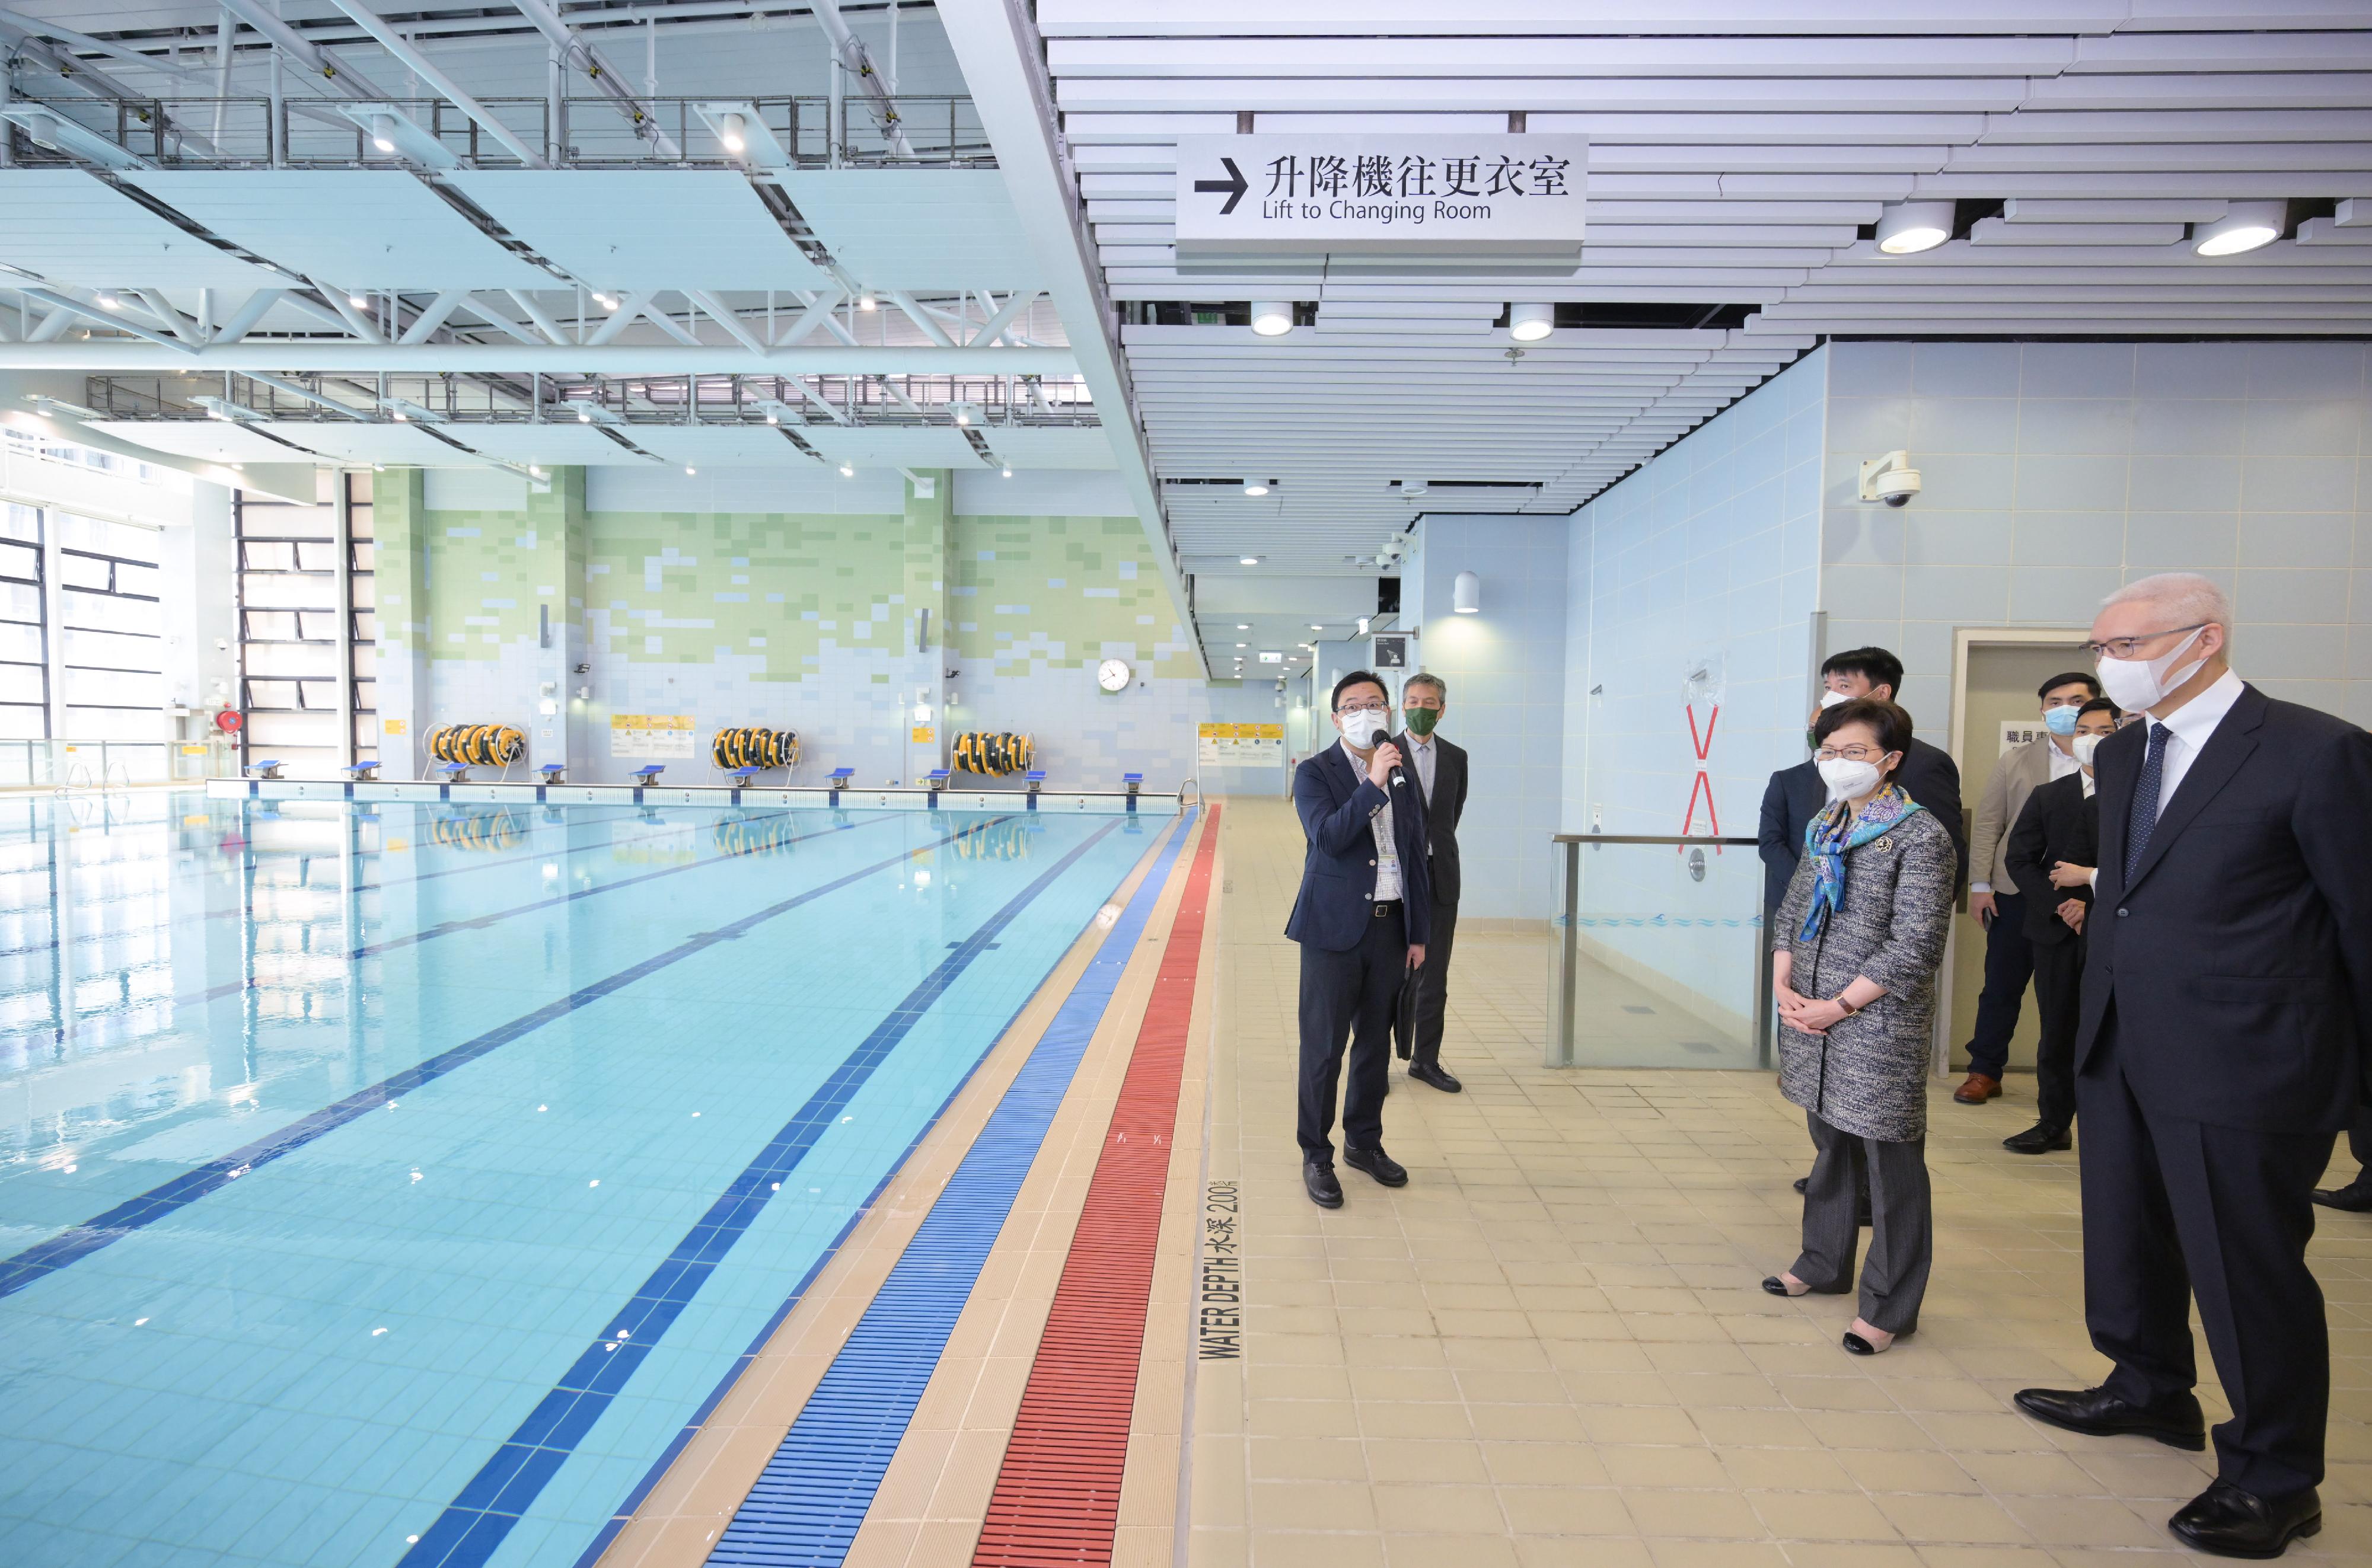 The Chief Executive, Mrs Carrie Lam, visited Wan Chai North today (May 4) to view the newly constructed Exhibition Centre Station of the East Rail Line cross-harbour extension and the neighbouring facilities. Photo shows Mrs Lam (second right) touring Wan Chai Swimming Pool and being briefed by a representative of the Leisure and Cultural Services Department on the facilities there. Looking on is the Chairman of the MTR Corporation Limited, Dr Rex Auyeung (first right).